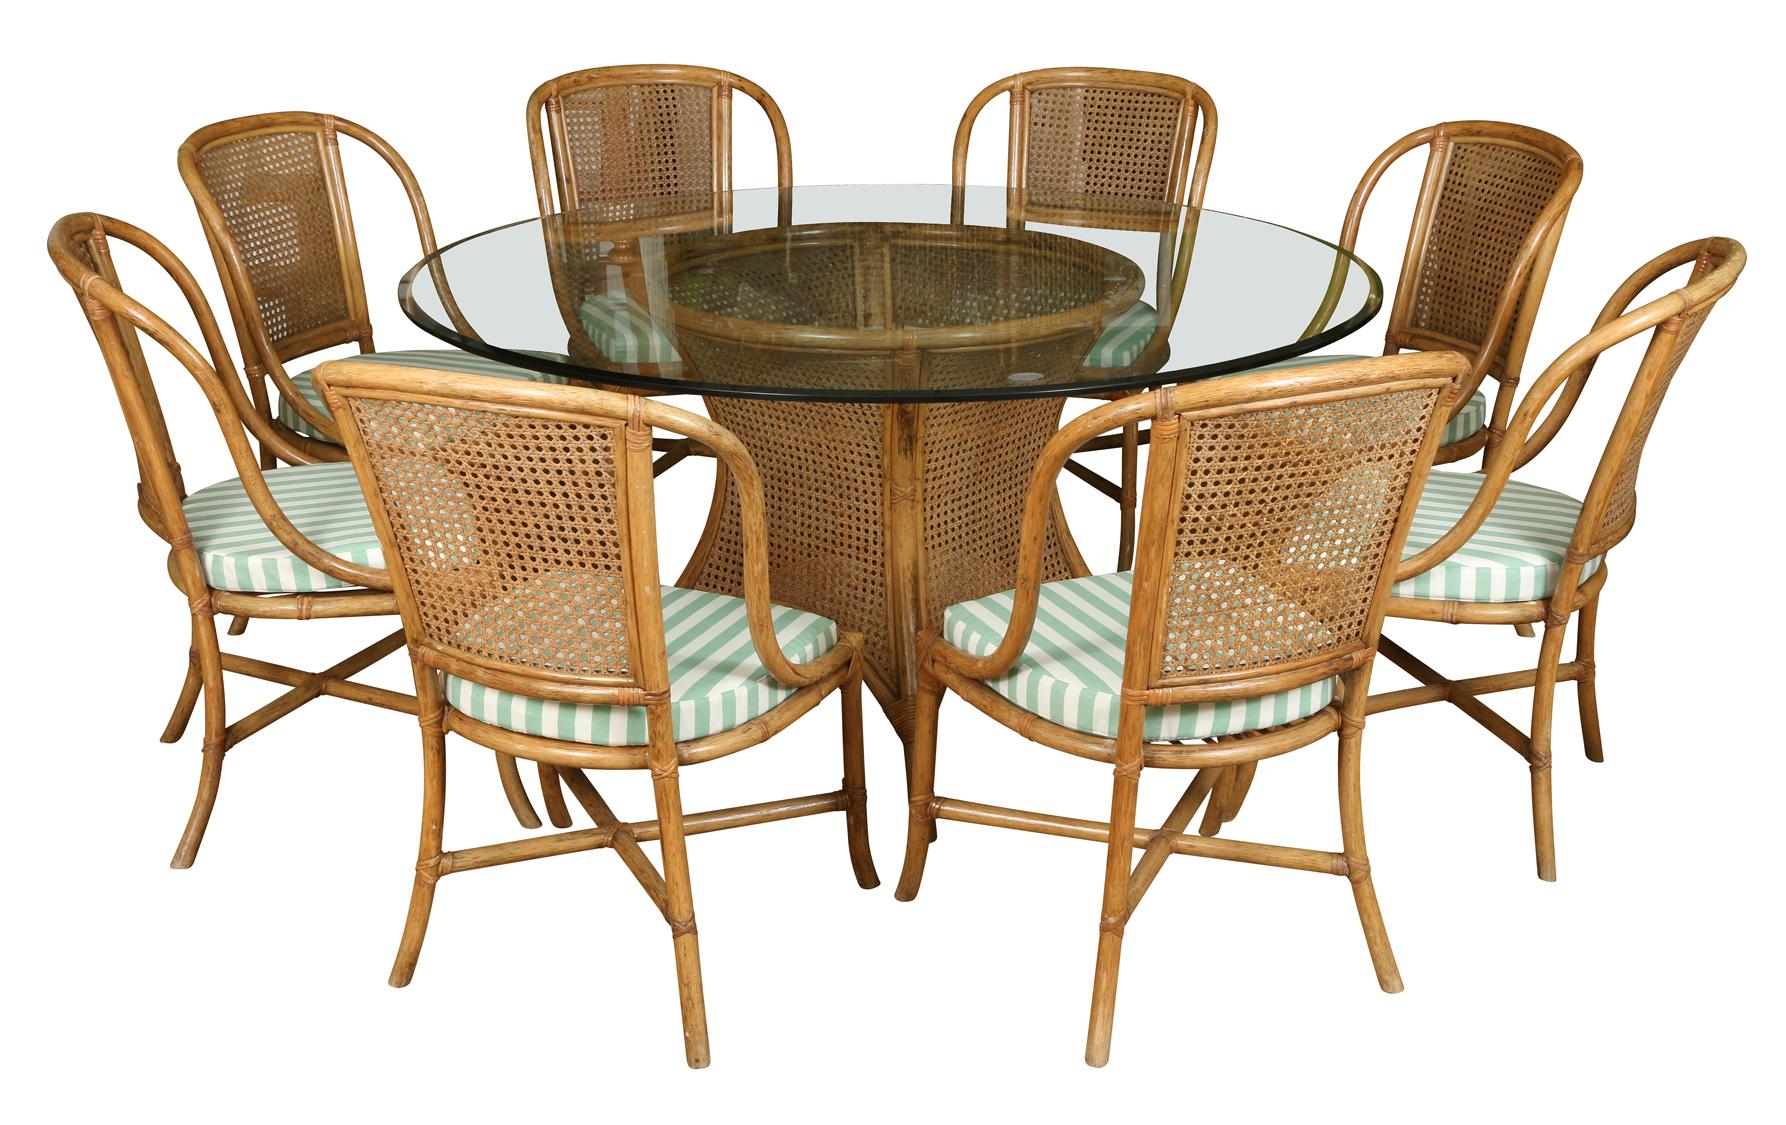 A chic set of rattan dining chairs with curved, caned backs and cross stretchers. The new custom removable seat cushions are in a cheerful green and white stripe.